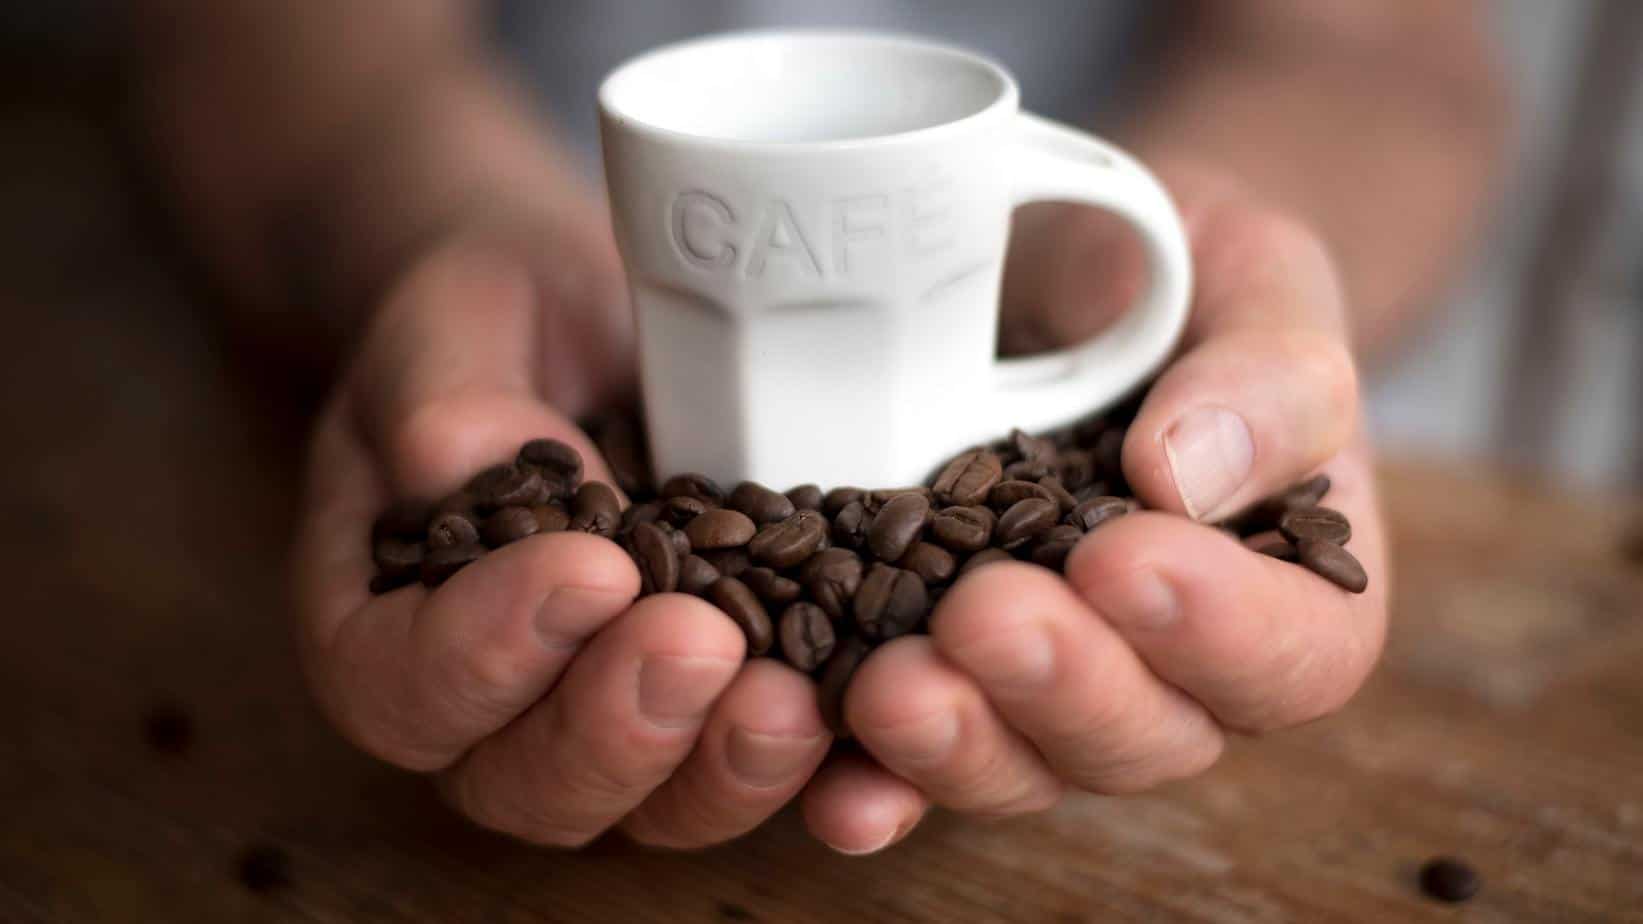 Handing a white coffe cup and coffee beans in the hands